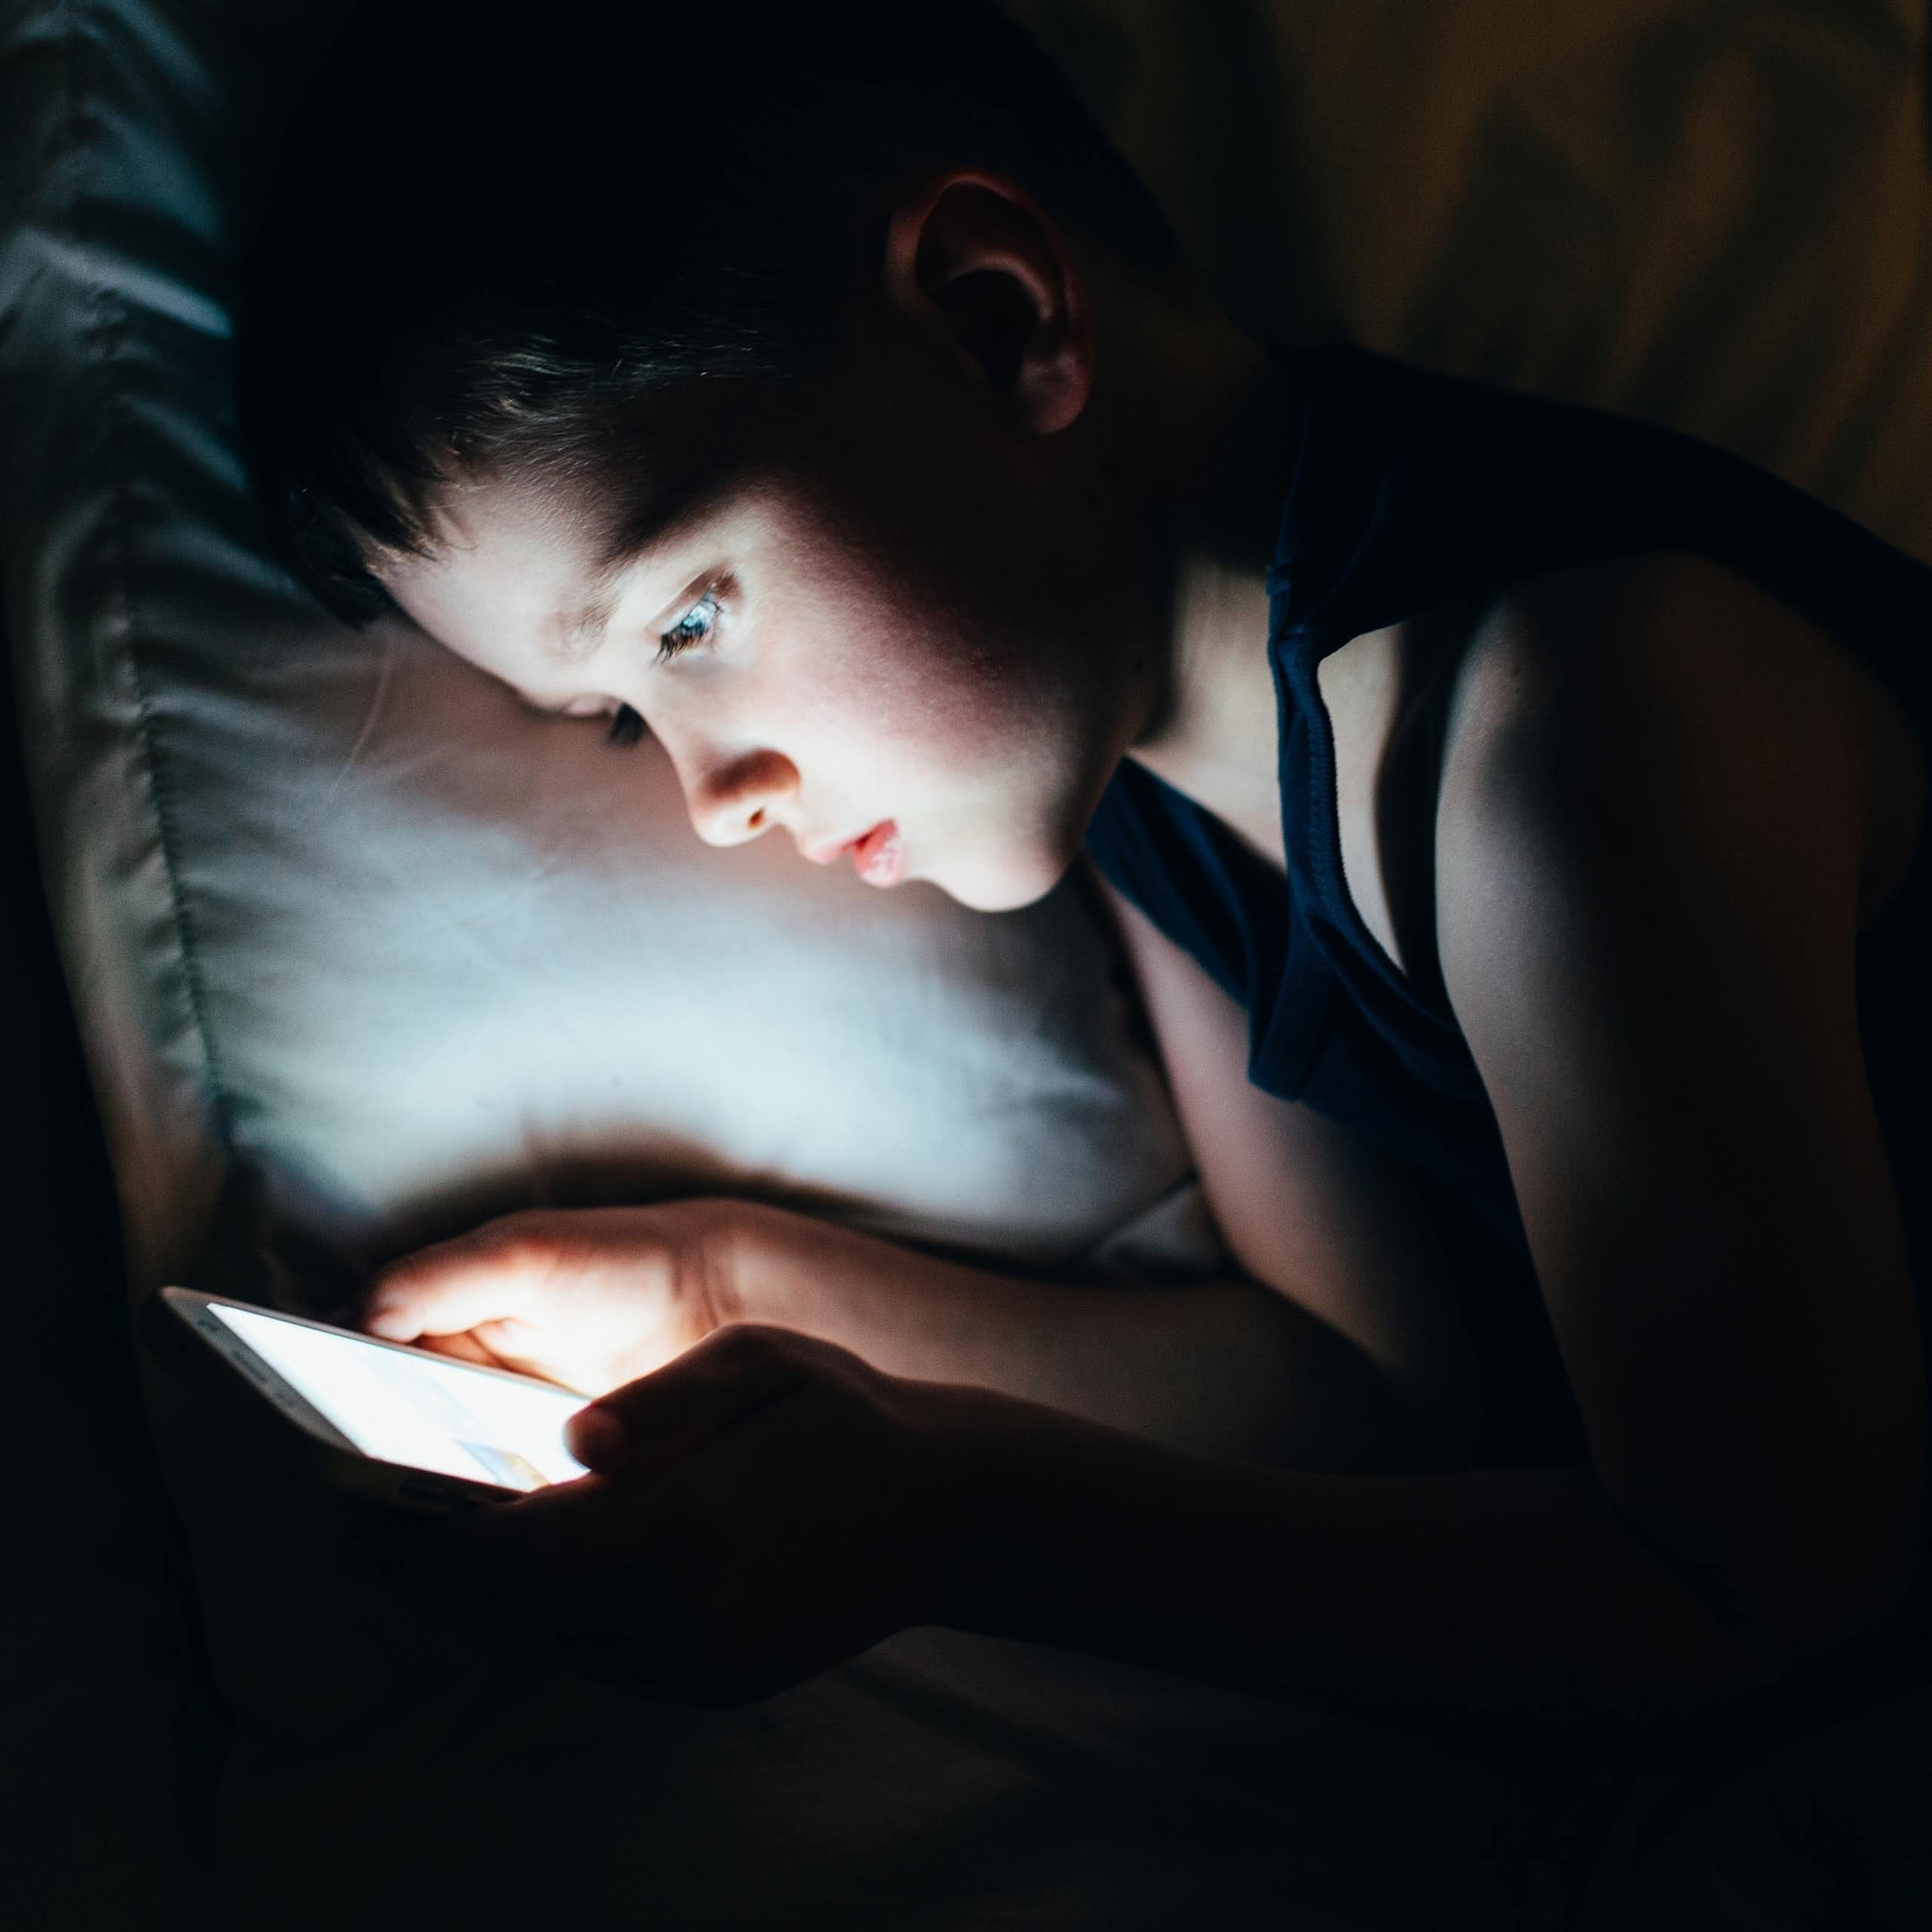 Australia will trial ‘age assurance’ tech to bar children from online porn. What is it and will it work?